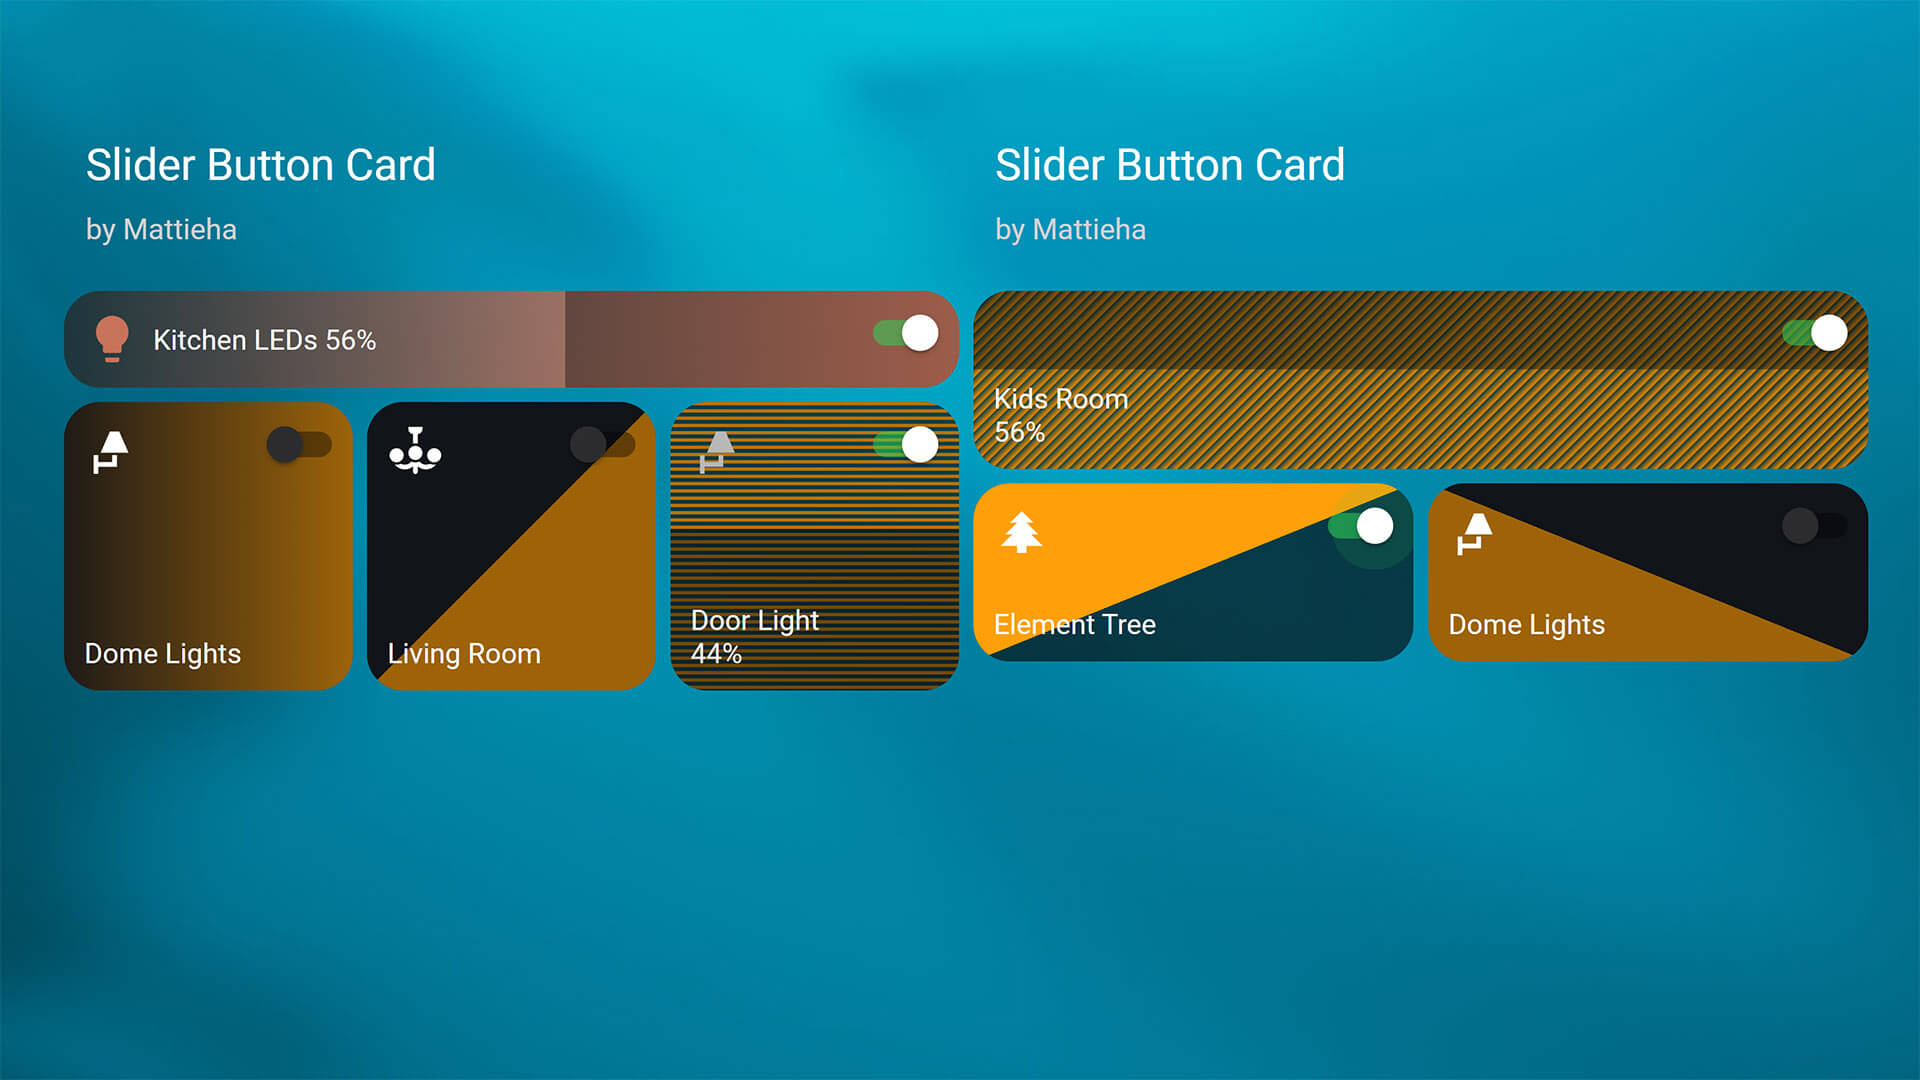 Slider Button Card Home Assistant